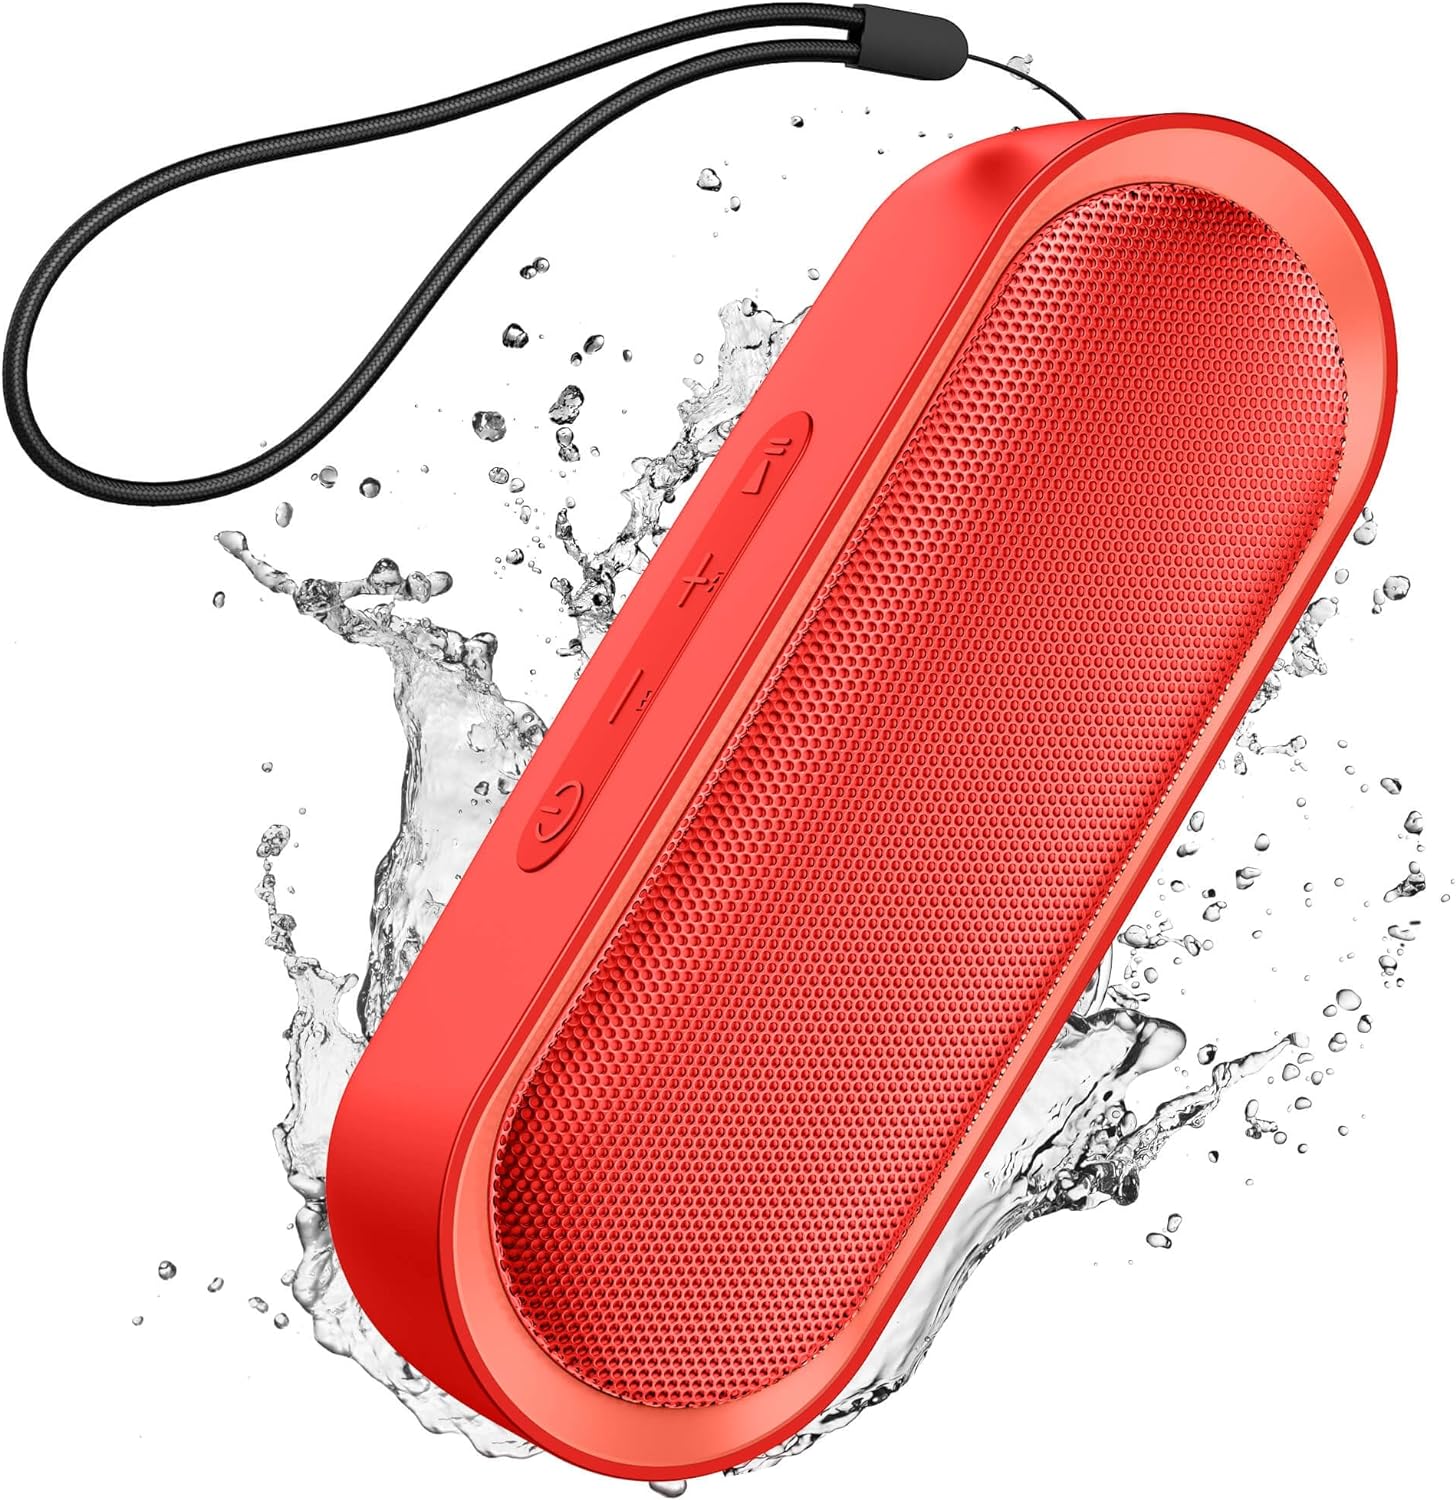 LENRUE Bluetooth Speakers, Waterproof Portable Speakers with TWS, 24 Playtime, Stereo Sound, Wireless for Home Shower Pool Beach Outdoor (Red)